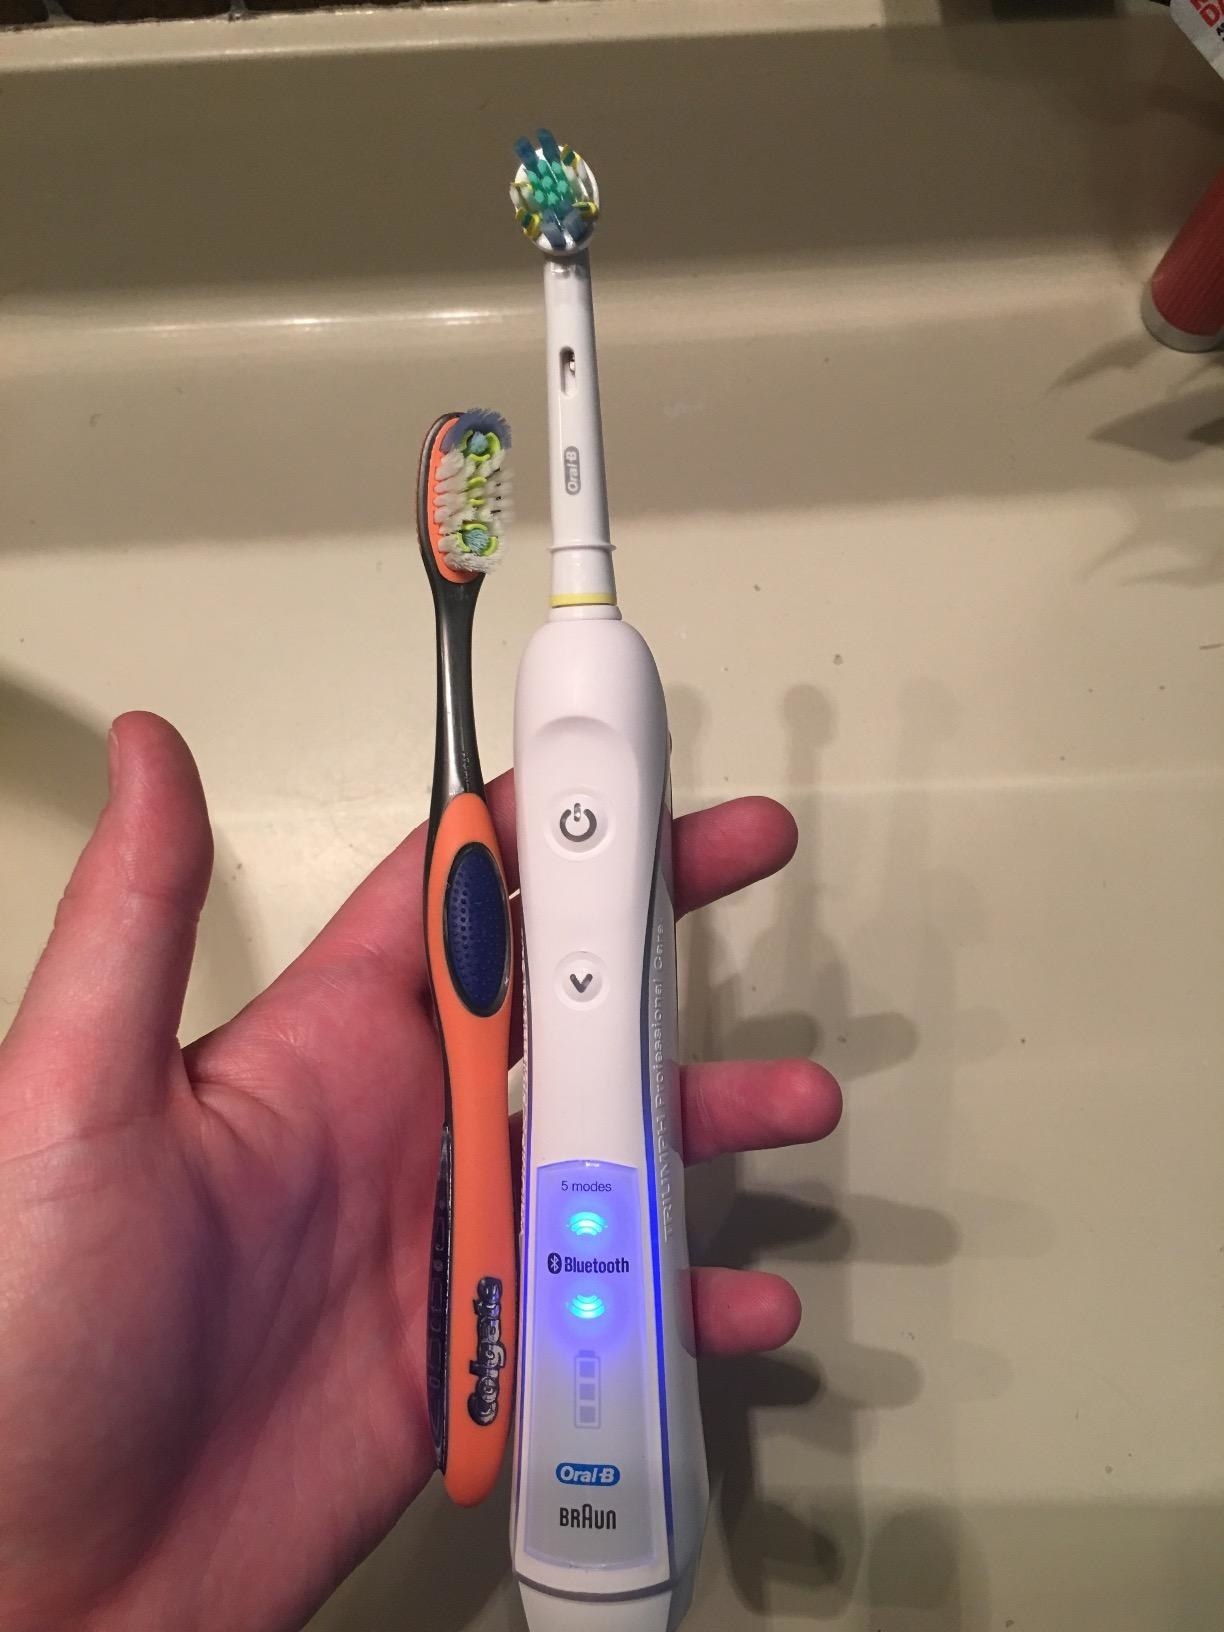 reviewer holding the electric toothbrush and a manual toothbrush, and the electric toothbrush is clearly bigger and sleeker